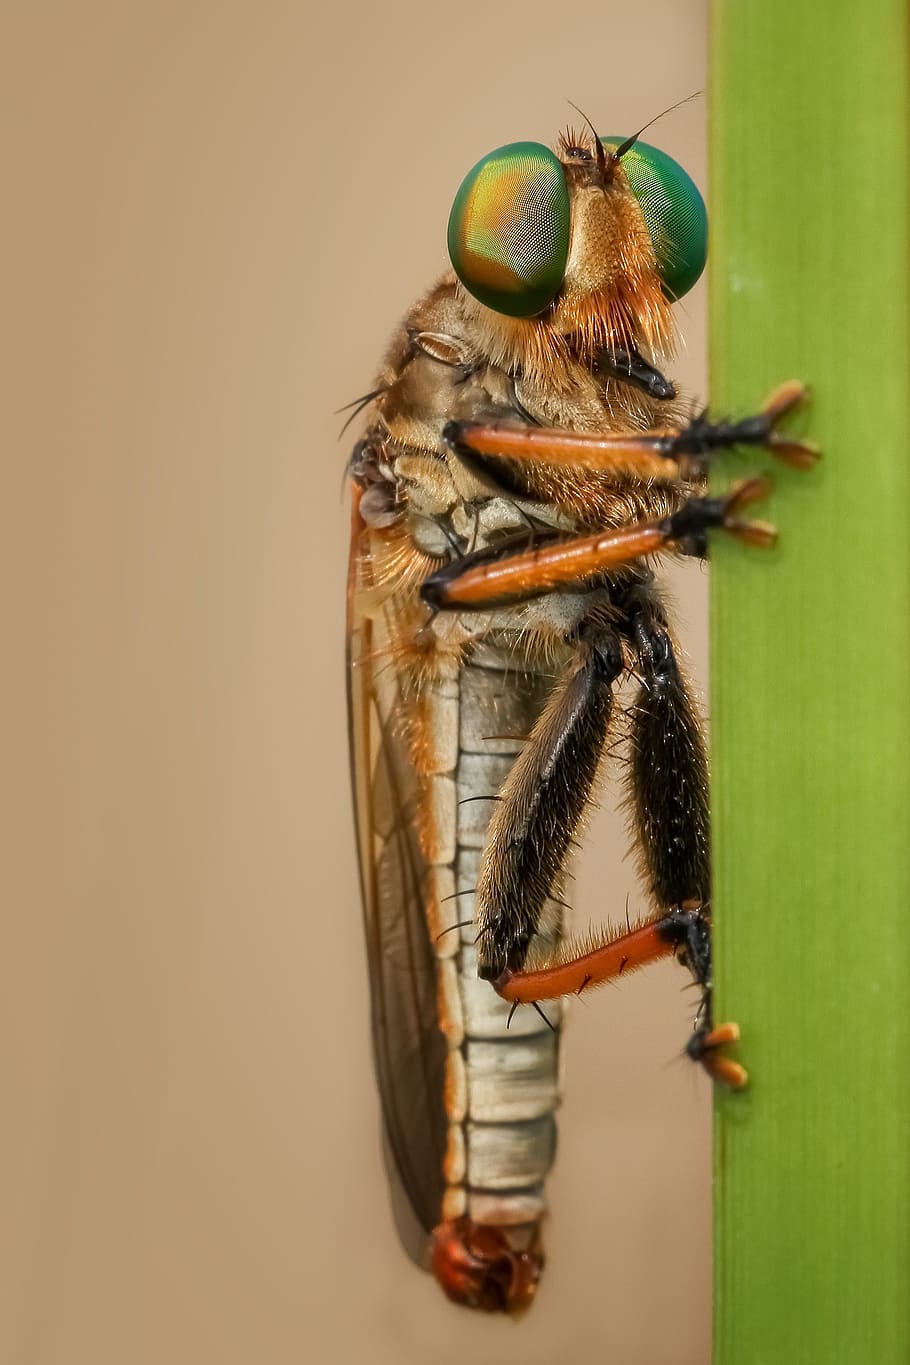 robberfly, insect, macro, nature, green, robber-fly, animal themes